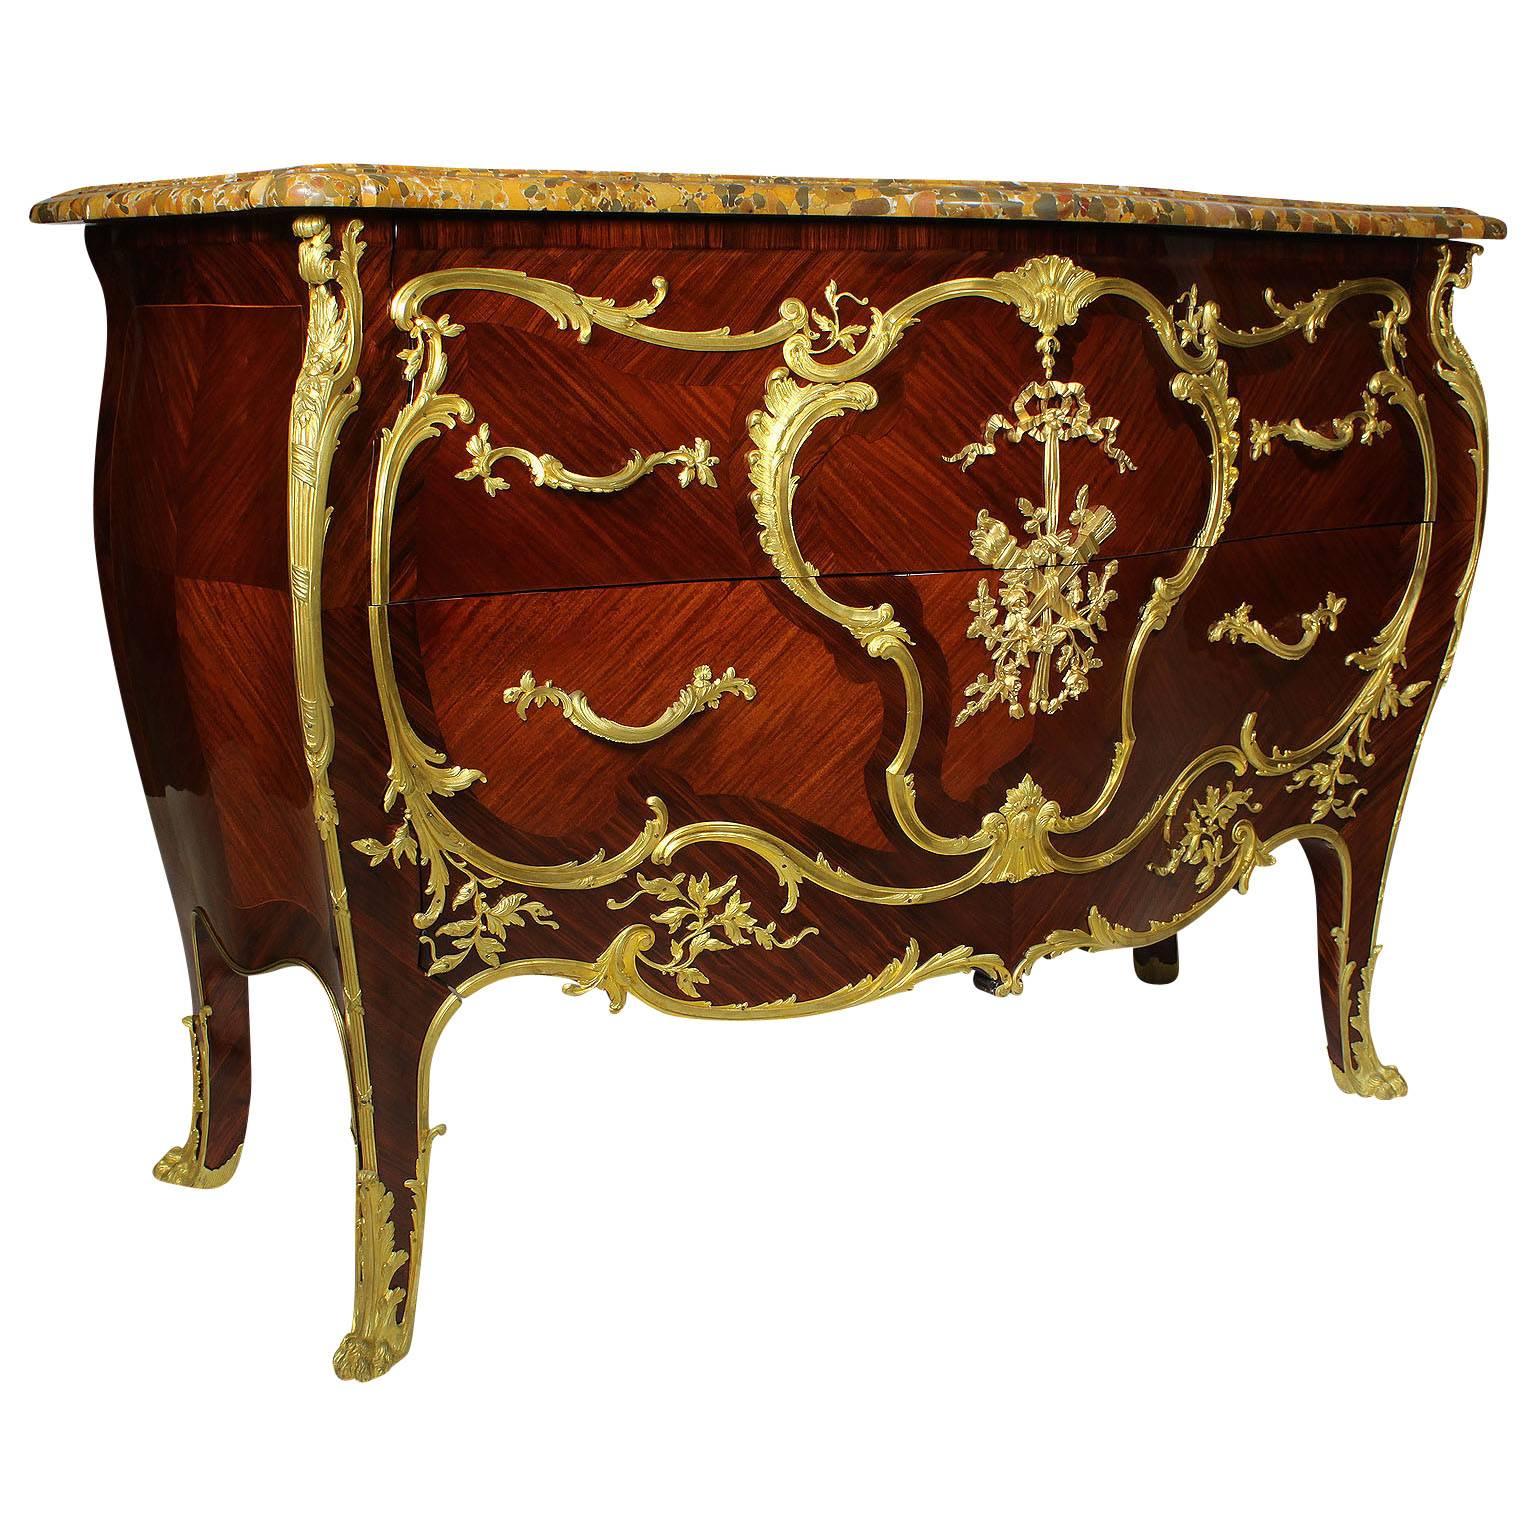 A very fine French Belle Époque 19th-20th century Louis XV style superb quality ormolu-mounted kingwood bombé commode with a Brêche d'Alep marble top, attributed to François Linke and Mâison Millet. Unsigned, Paris, circa 1900.

Note: The ormolu